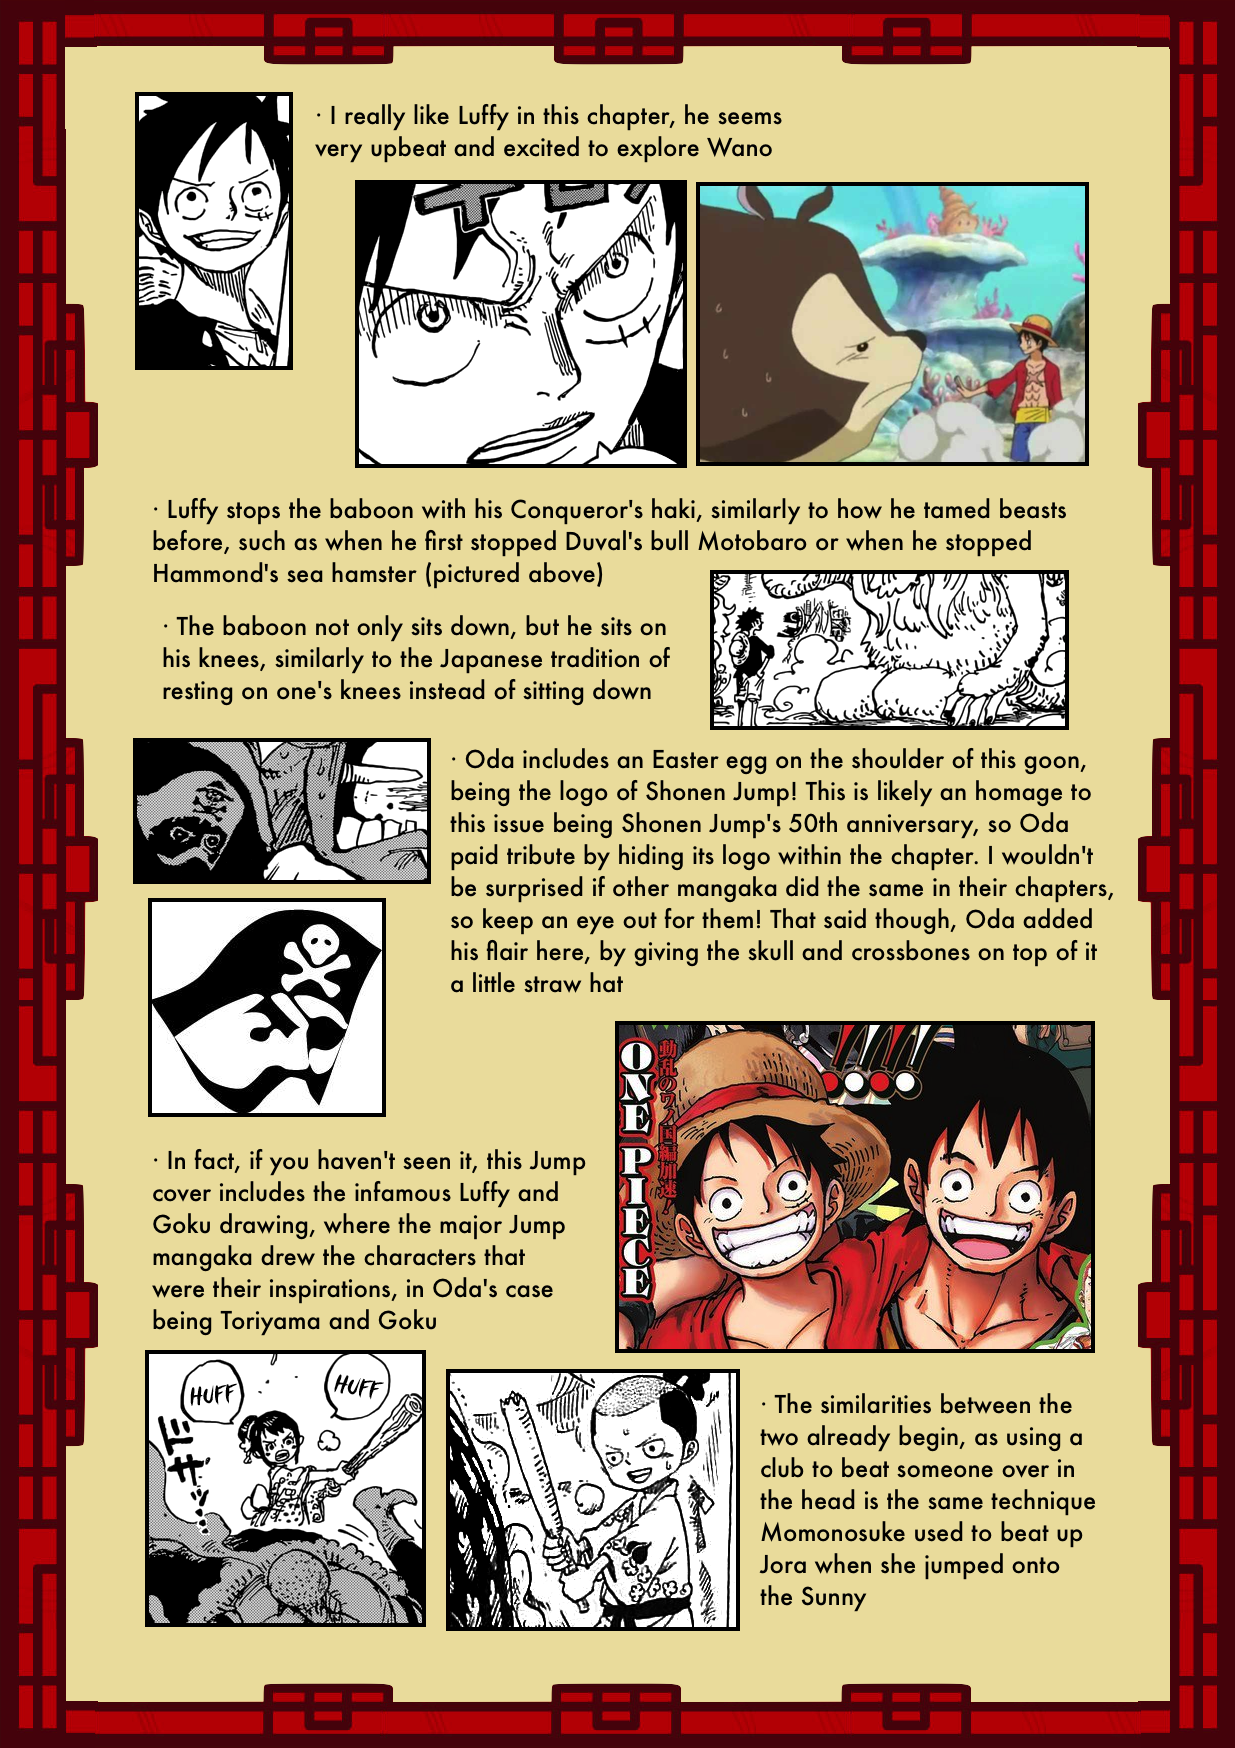 Chapter Secrets Chapter 911 In Depth Analysis The Library Of Ohara